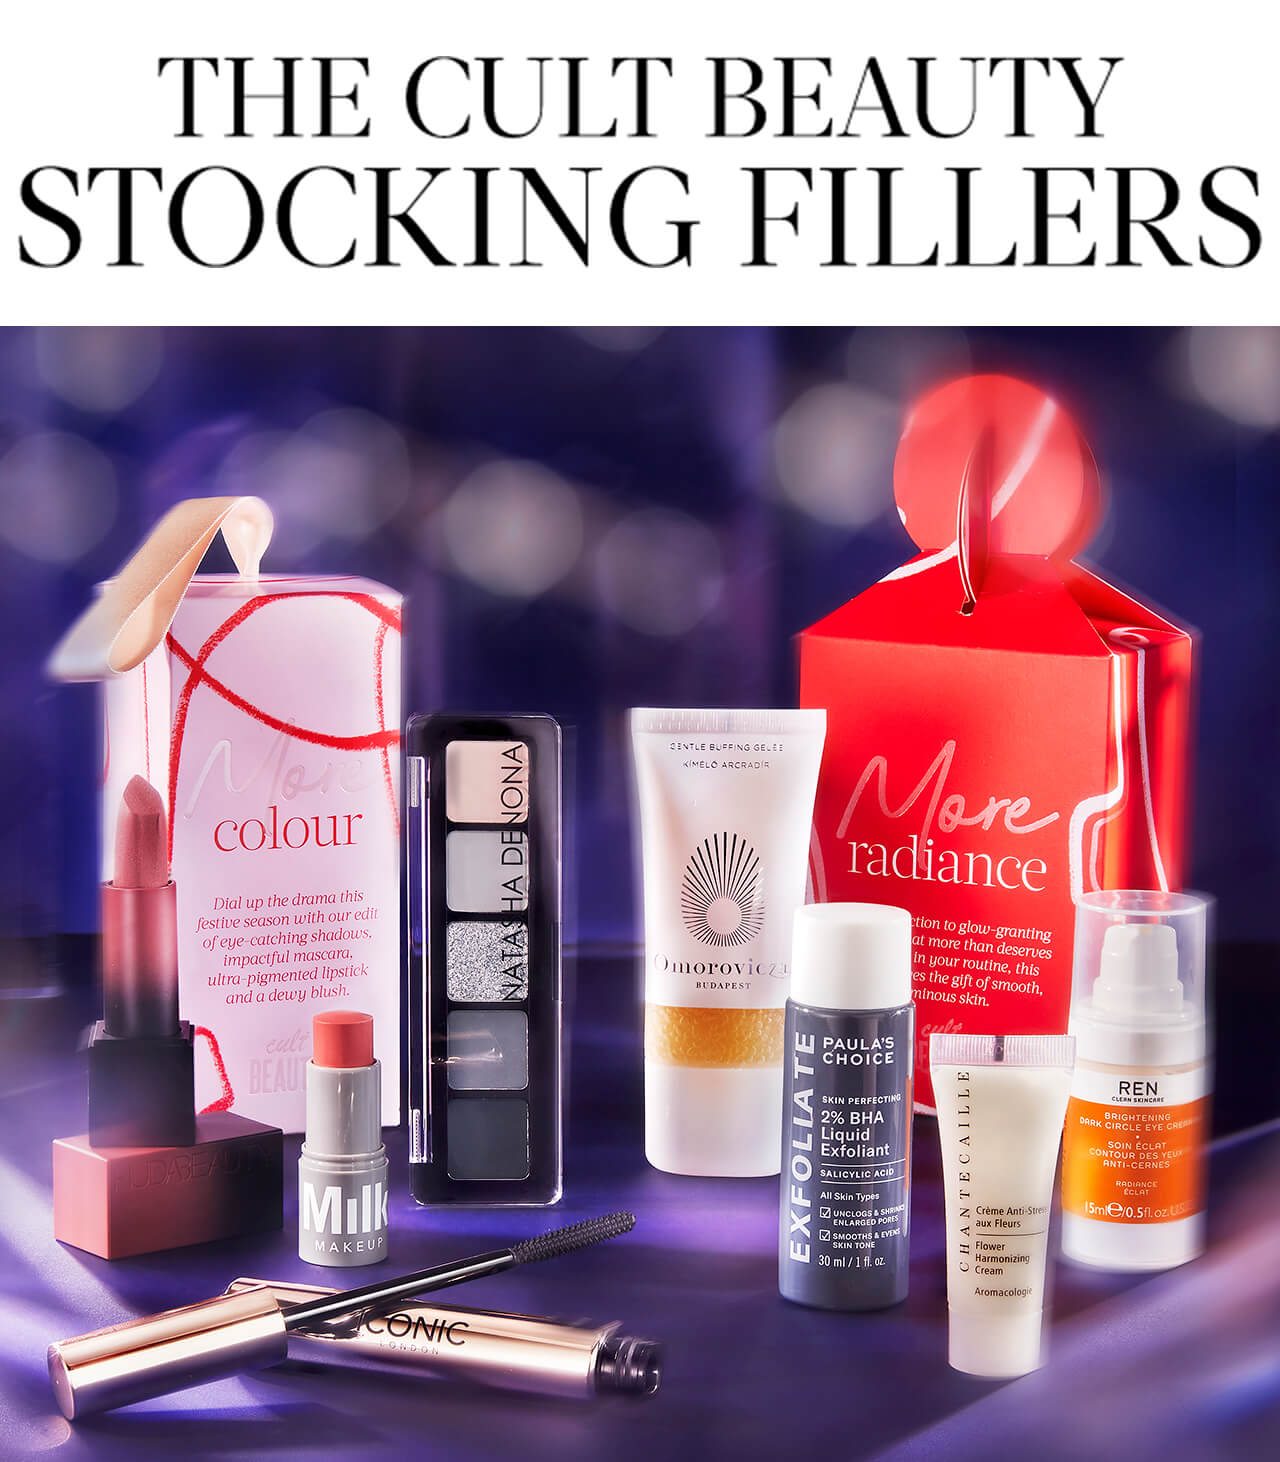 CULT BEAUTY STOCKING FILLERS